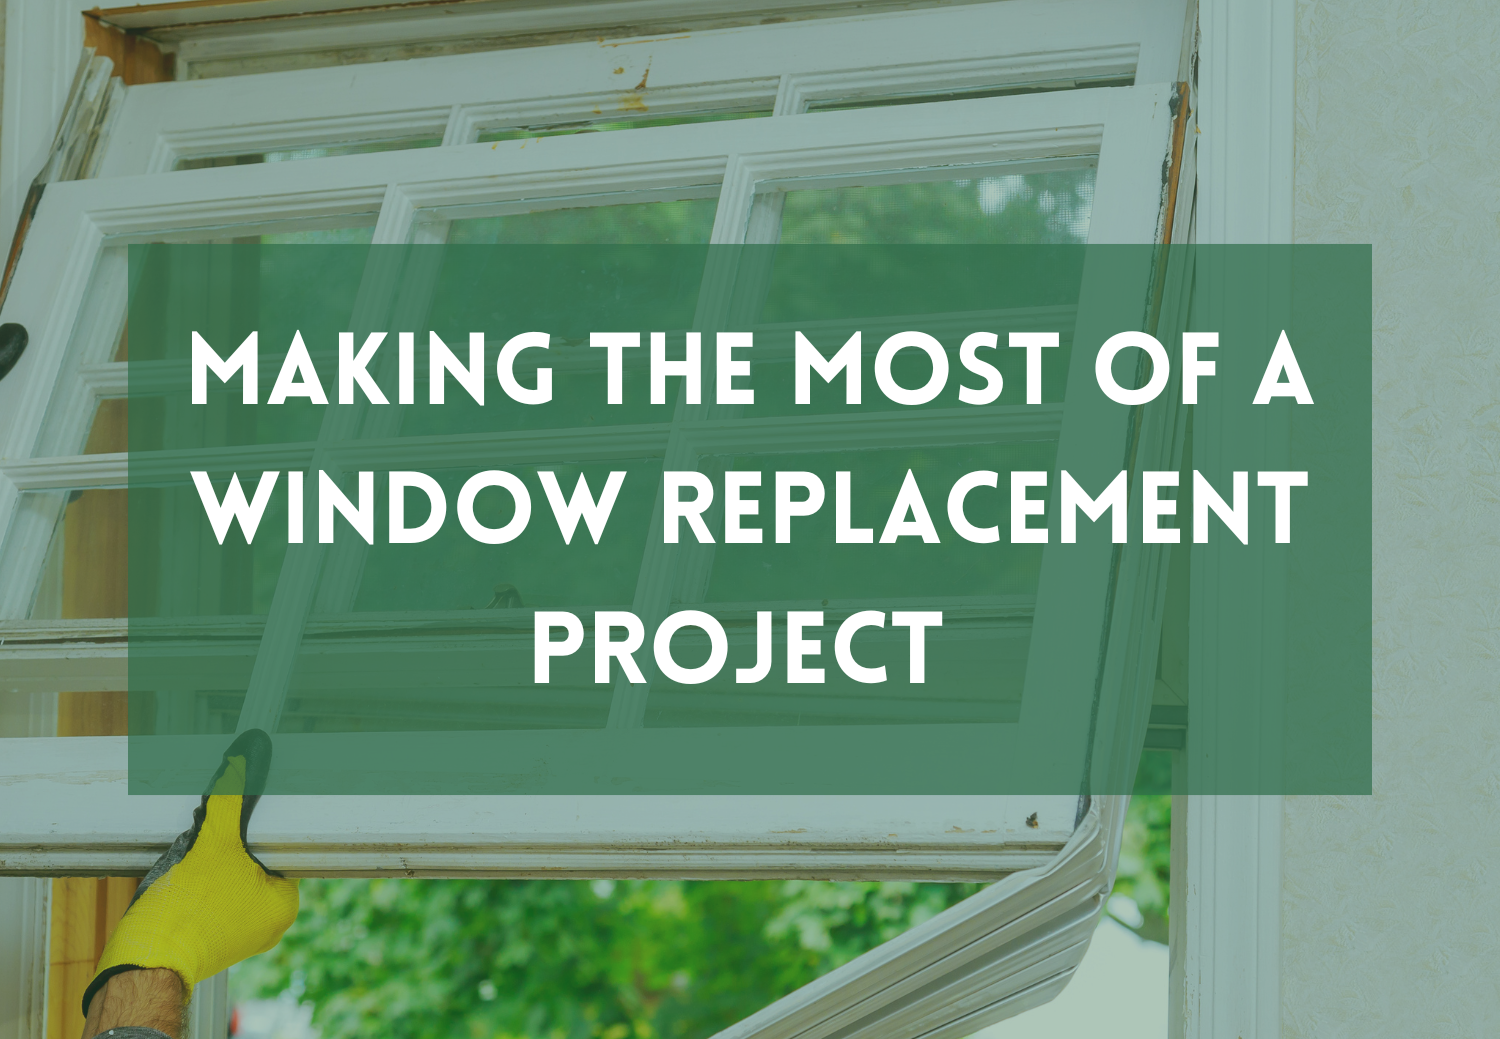 Making the Most of a Window Replacement Project